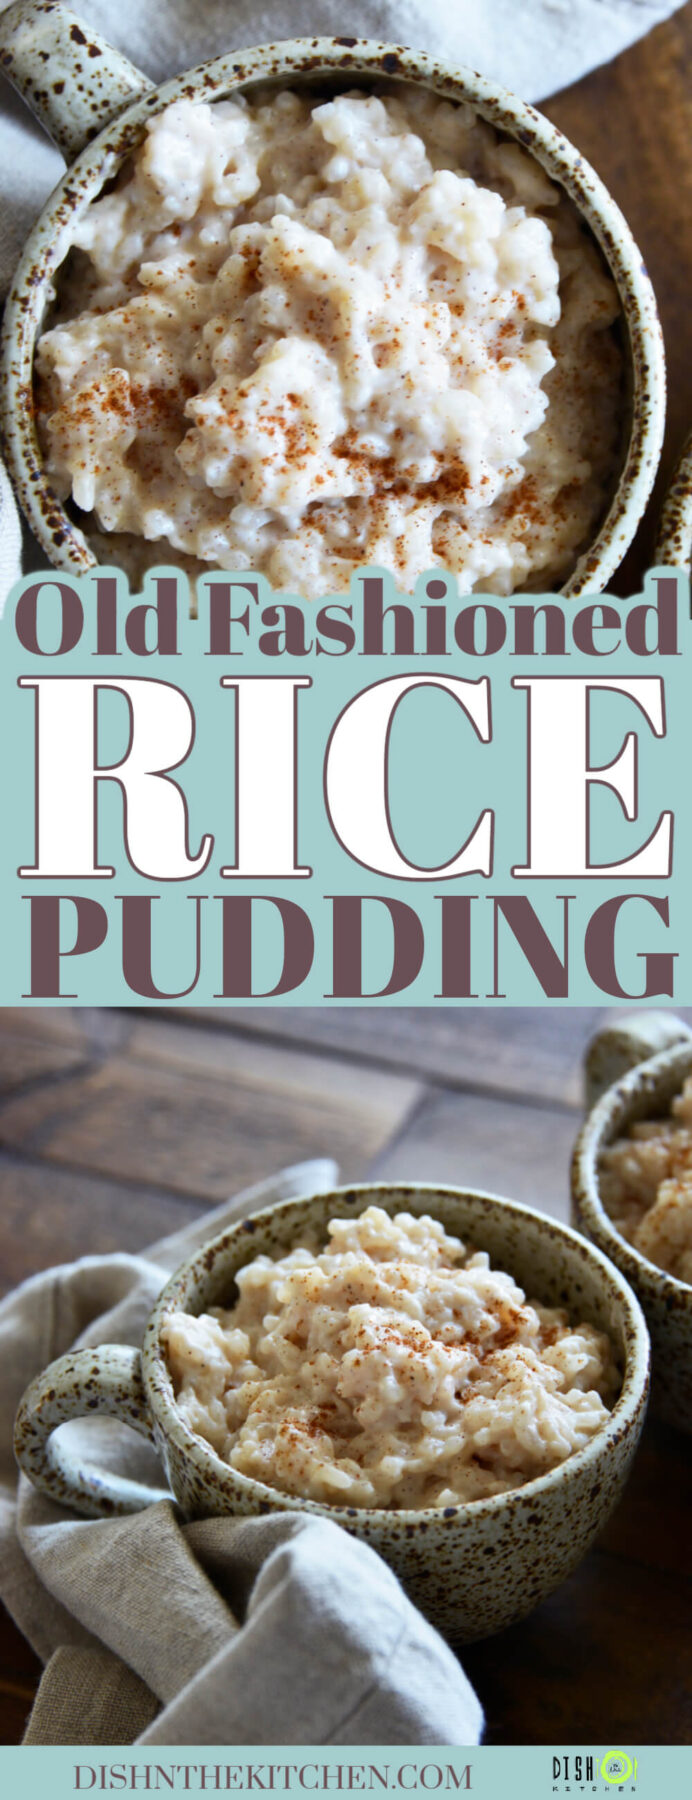 Pinterest image for Old Fashioned Rice Pudding Recipe featuring creamy cooked rice in a speckled pottery mug.